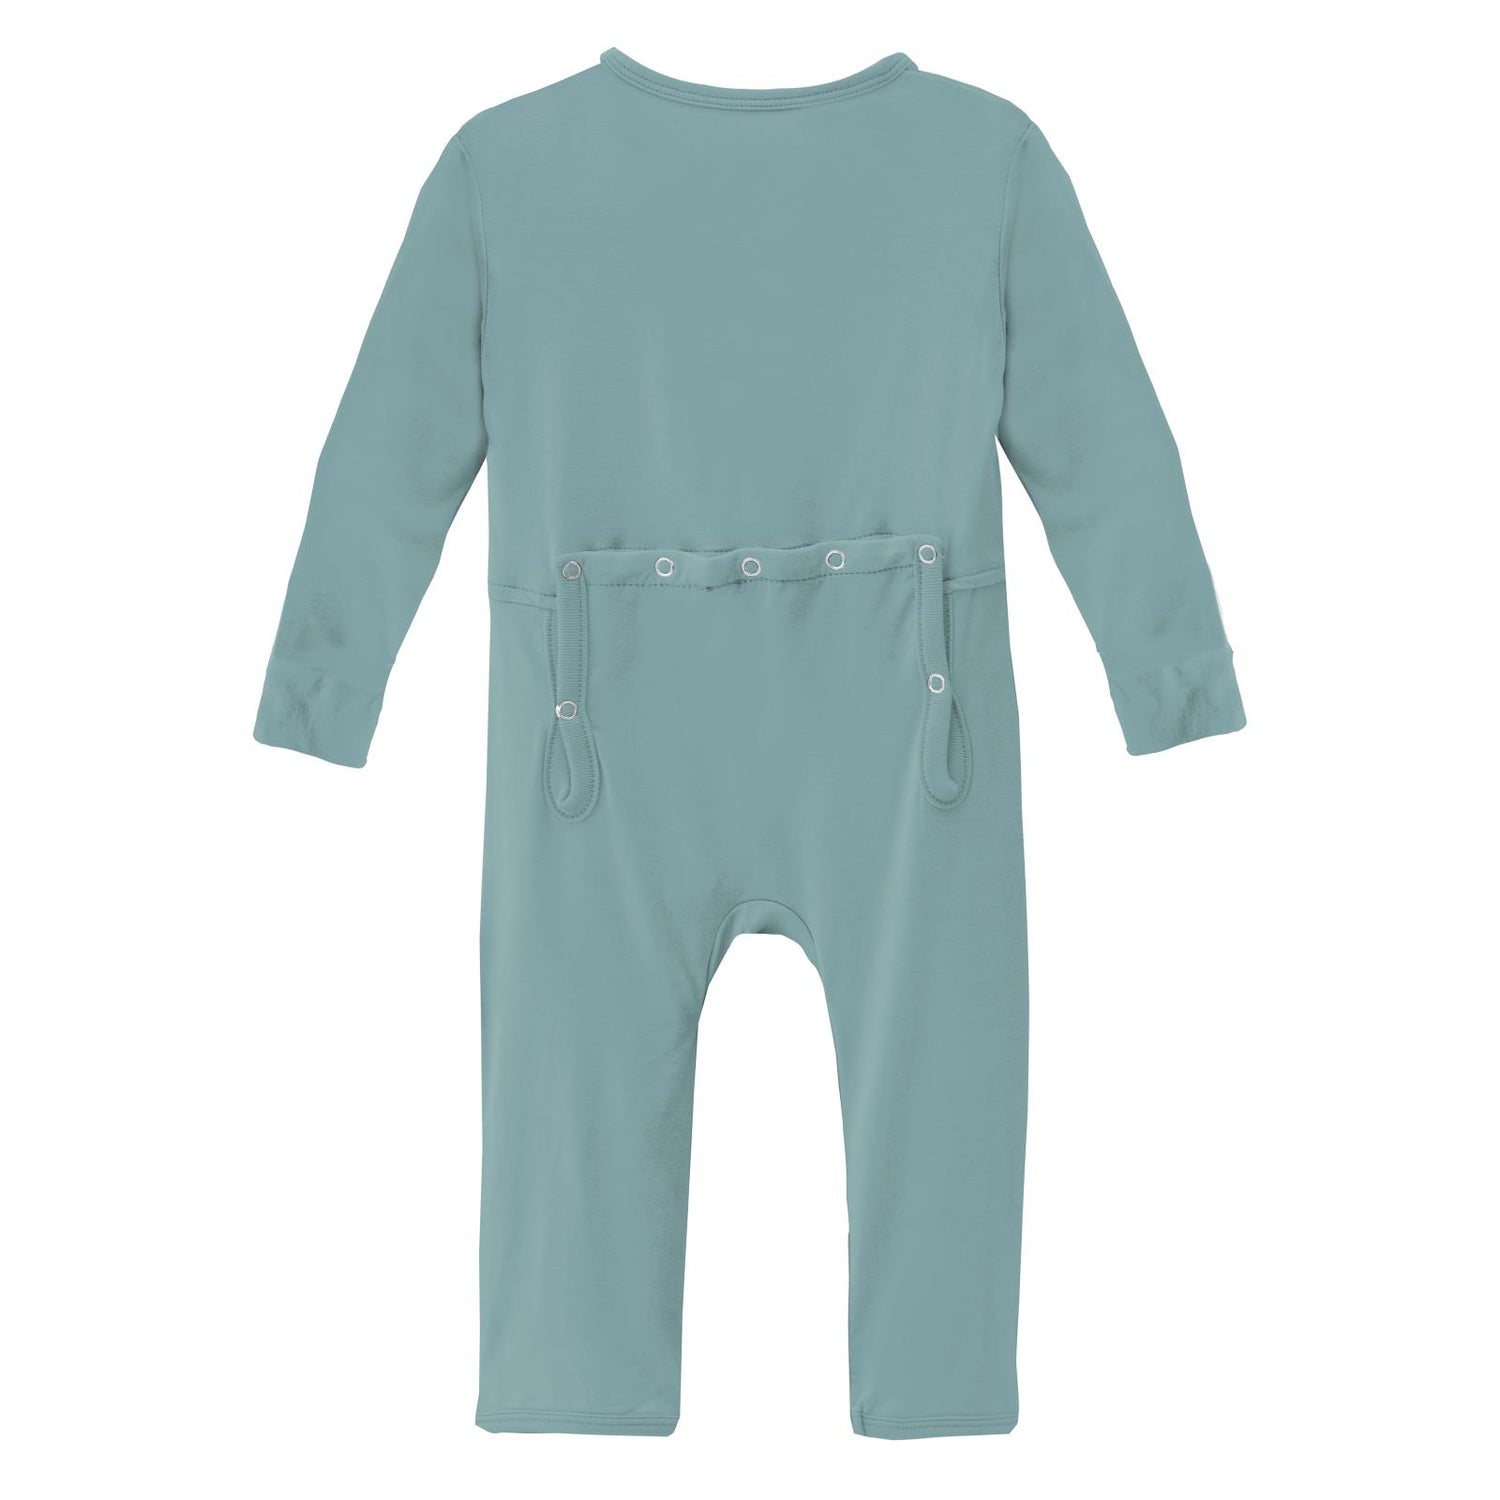 Coverall with Zipper in Jade